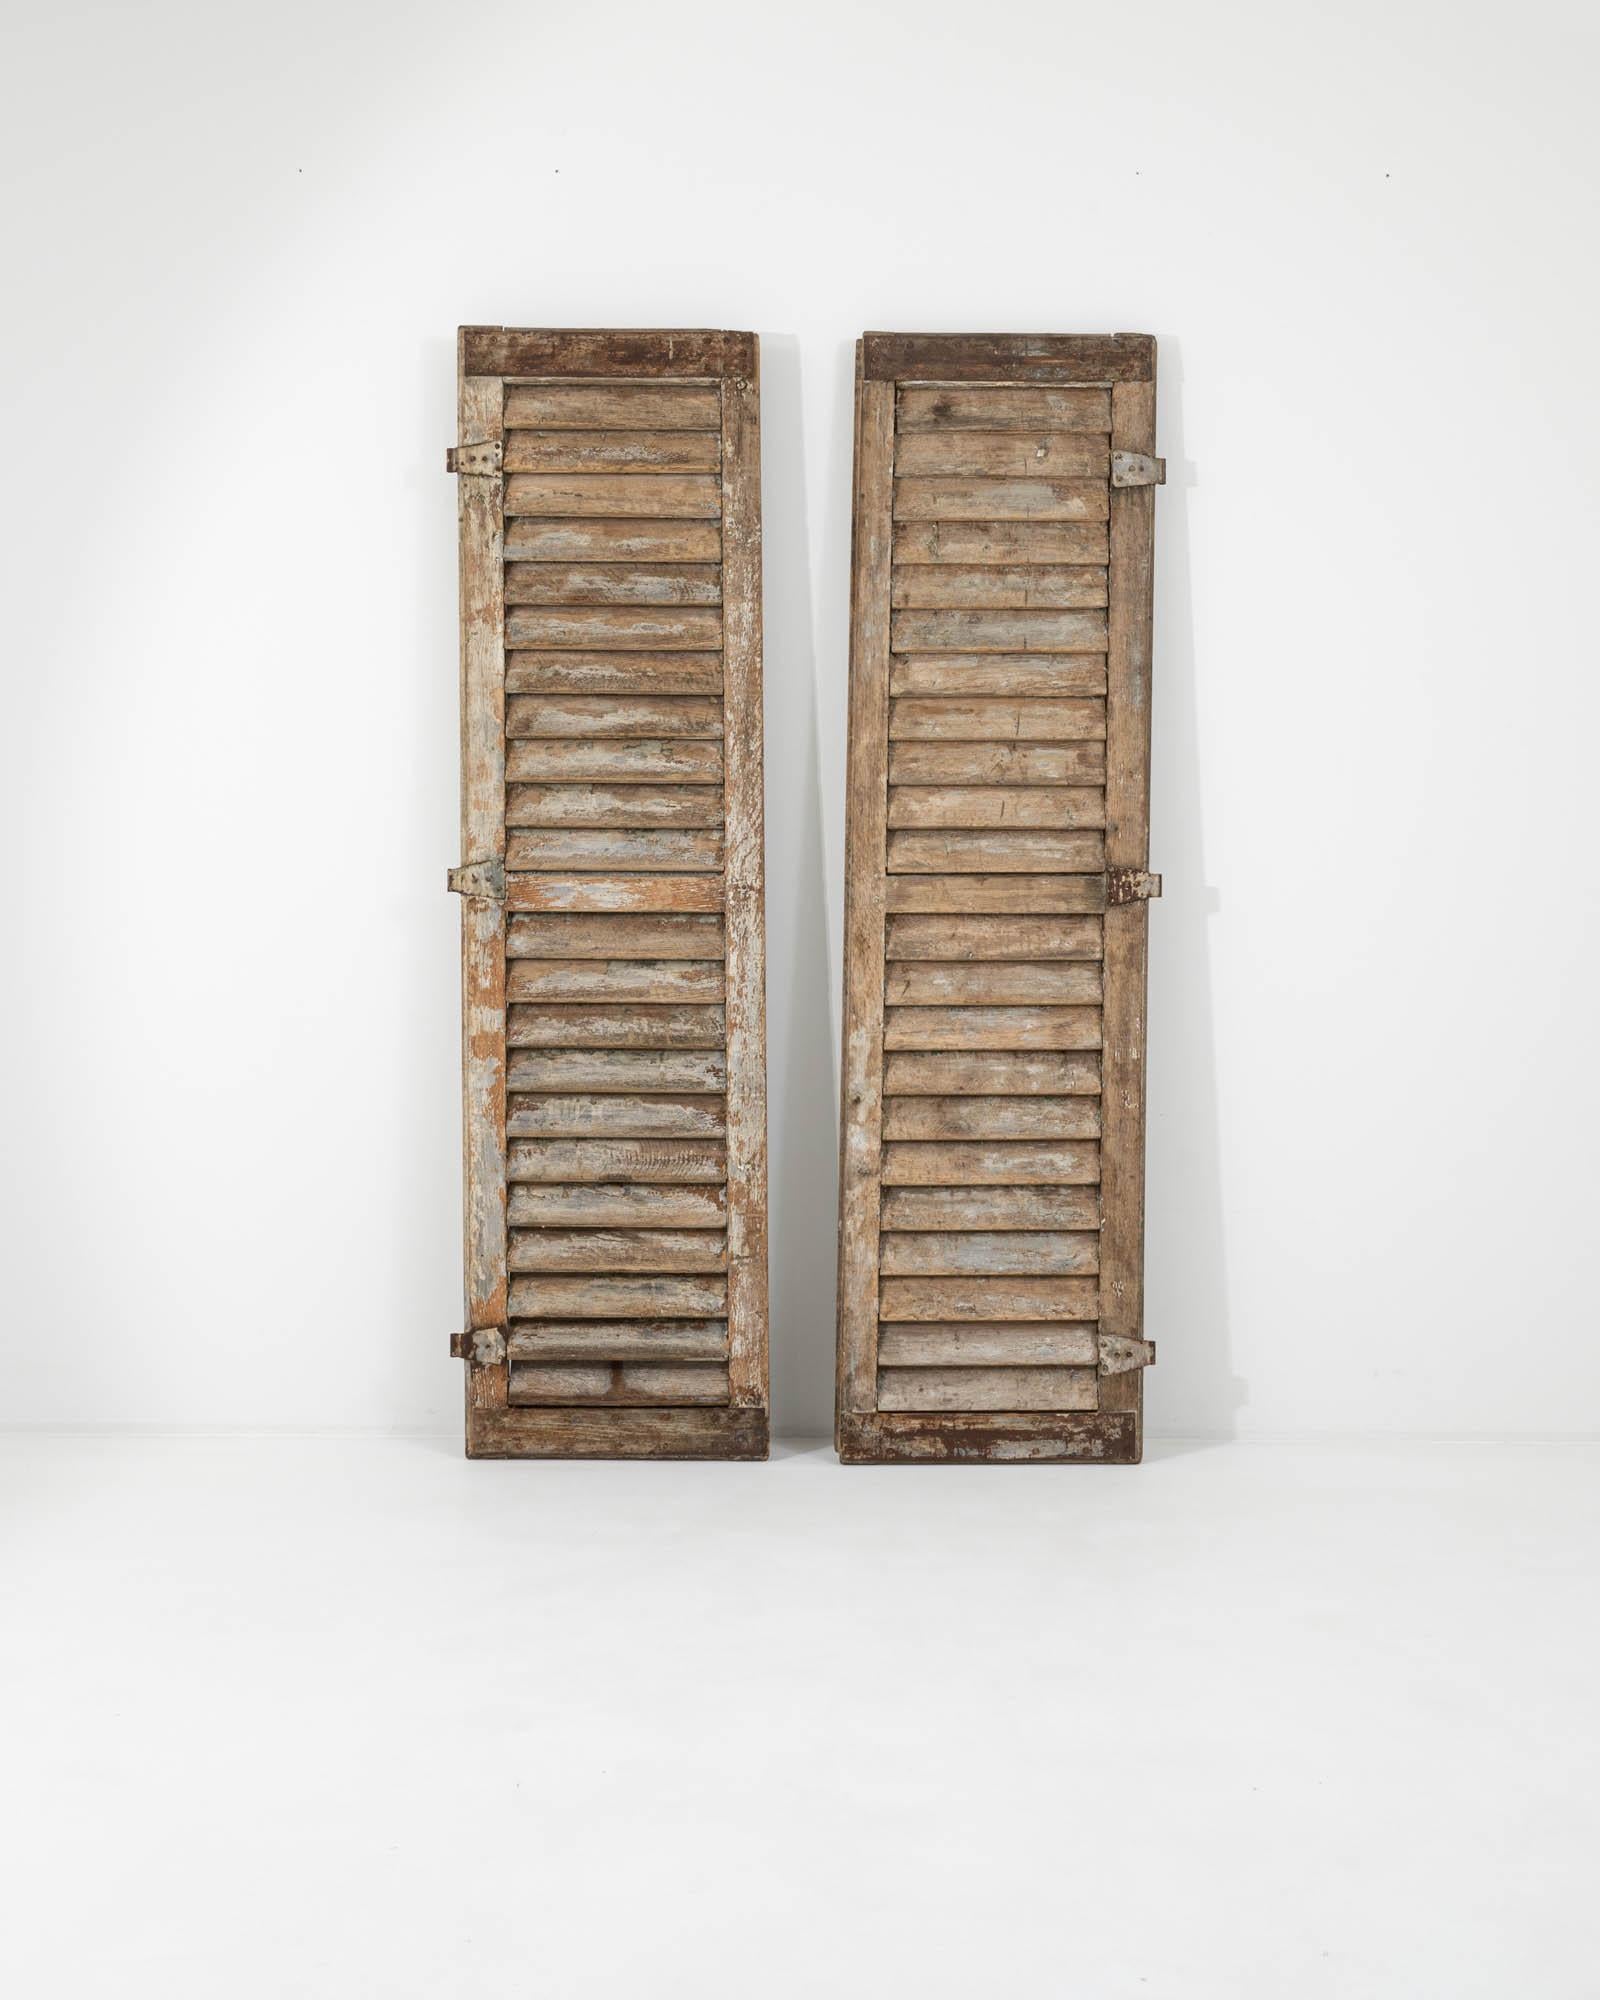 The nostalgic finish and striking height of this pair of antique wooden shutters makes them a unique accent. Built in France in the 1800s, the design is typical of high-windowed town houses and provincial chateaus. The angled slats allow air to